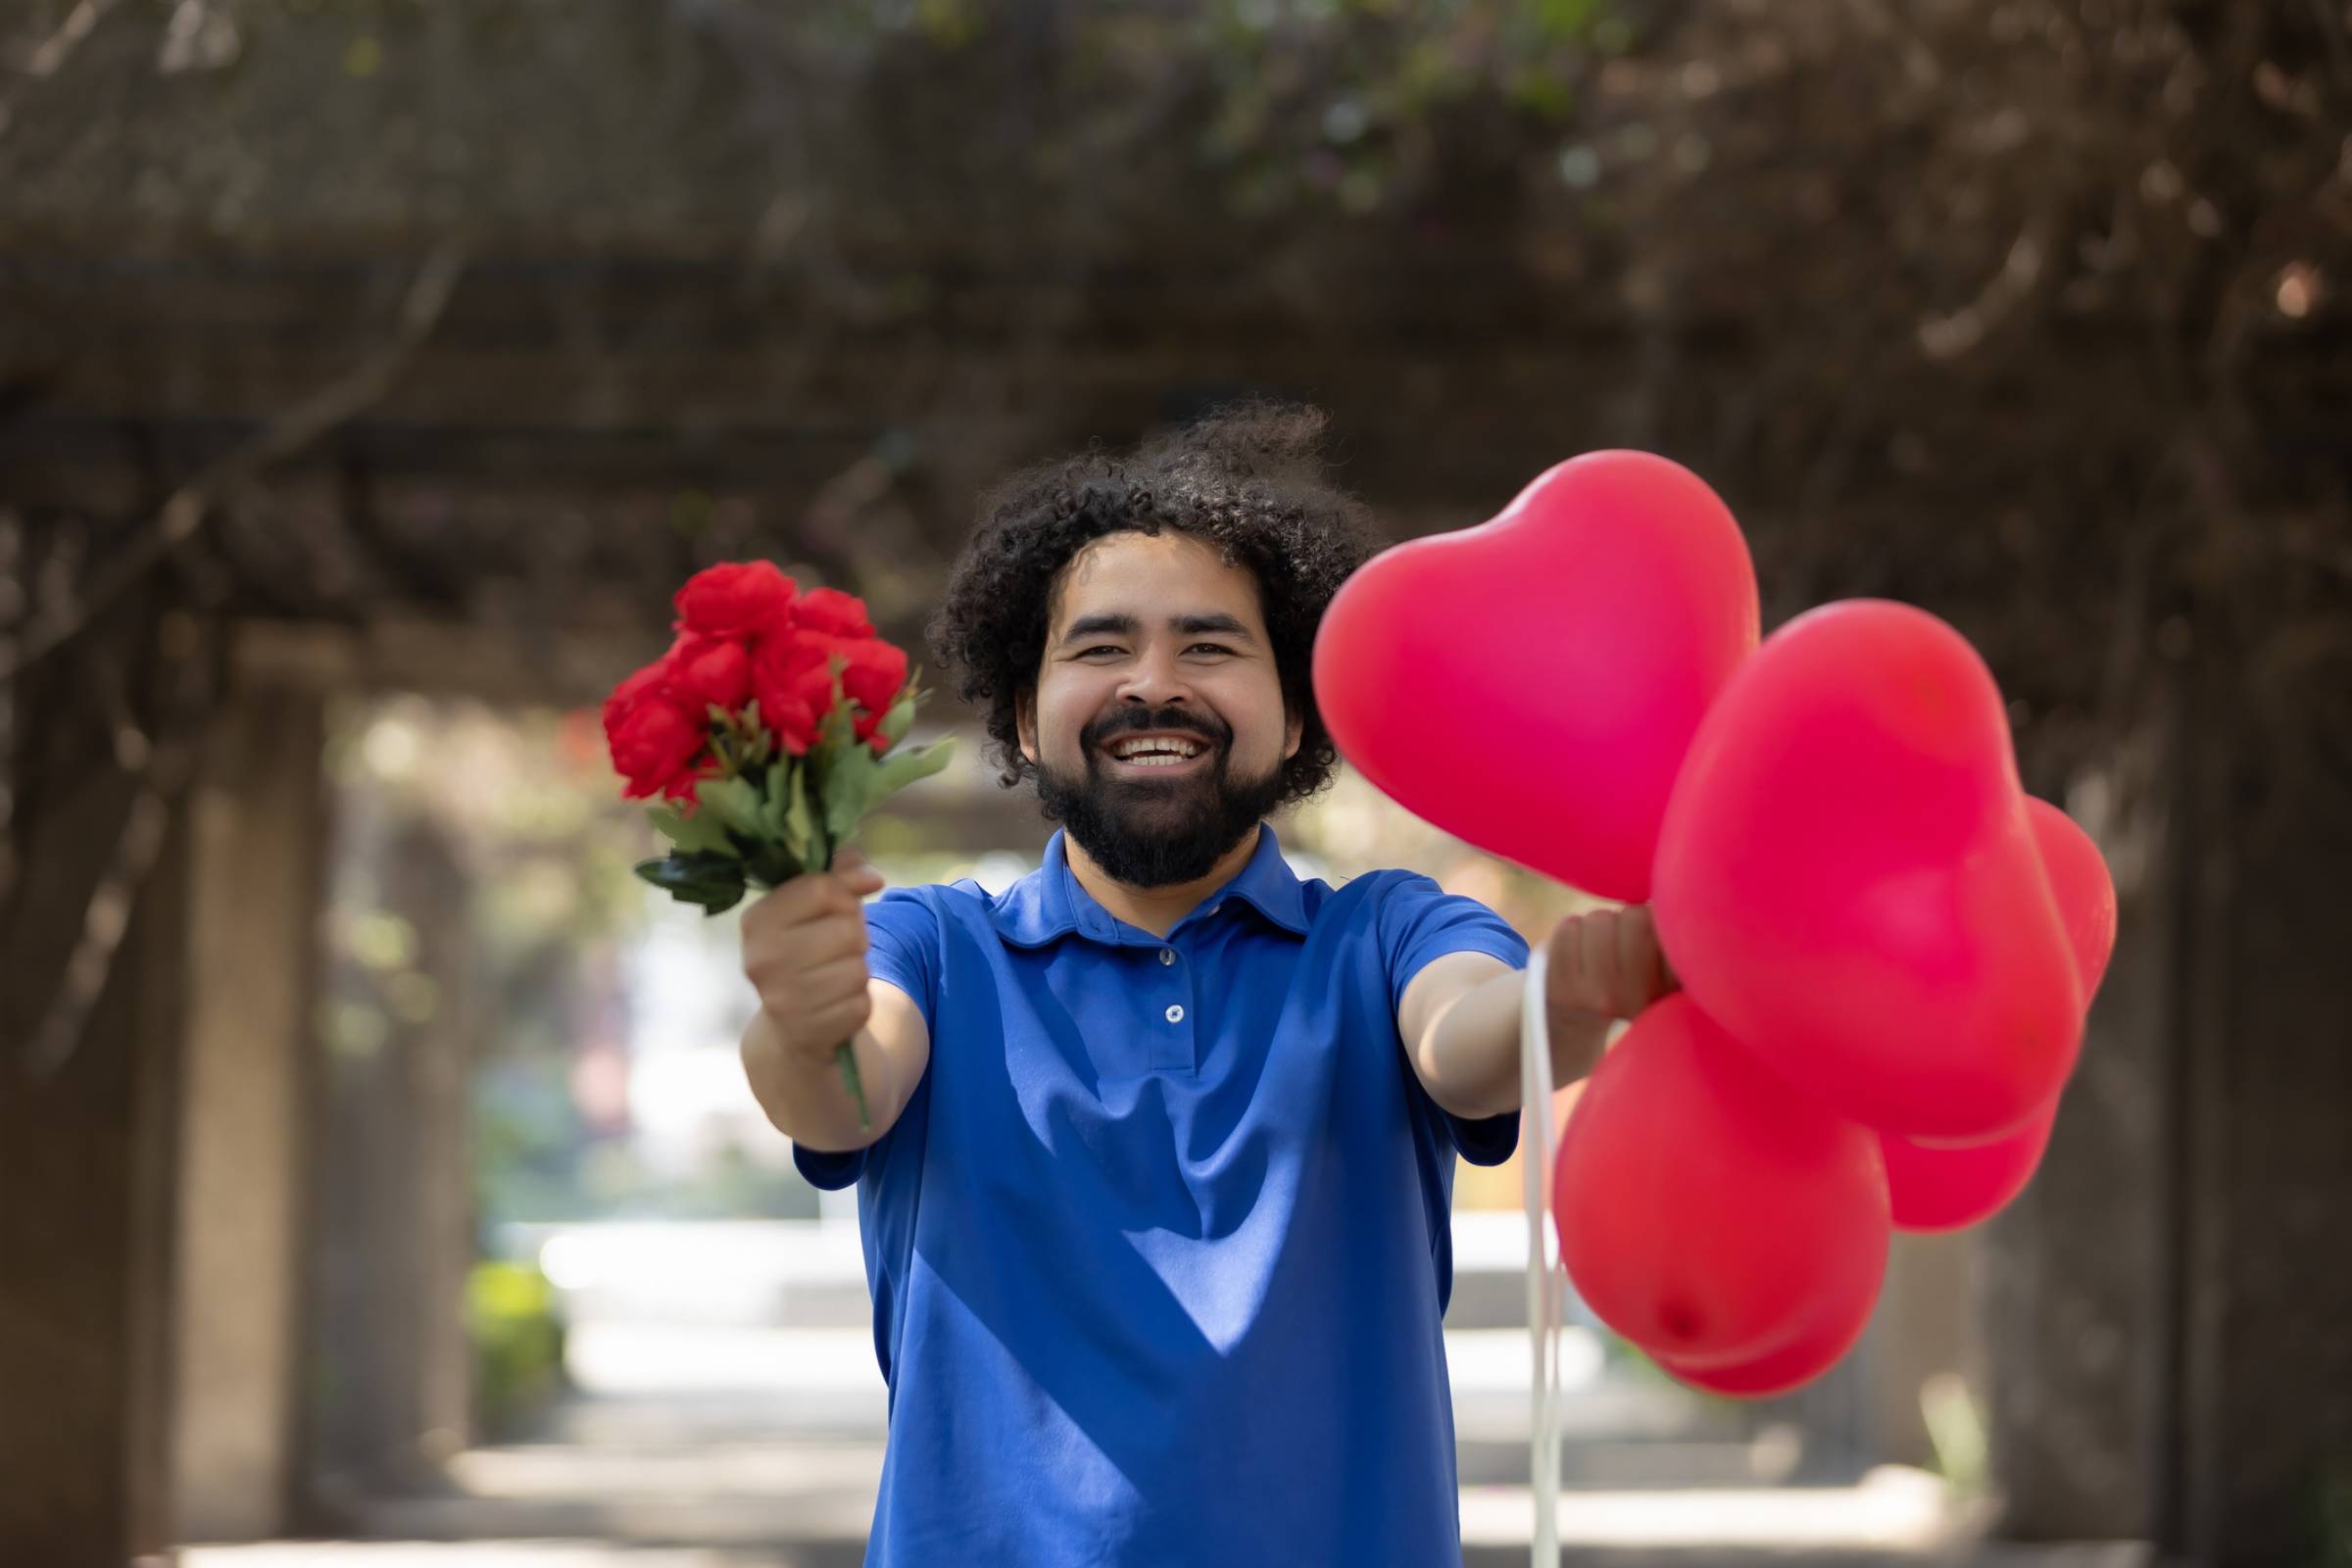 A delivery guy wearing a blue shirt and carrying personalised heart-shaped balloons on one hand and red flowers on the other